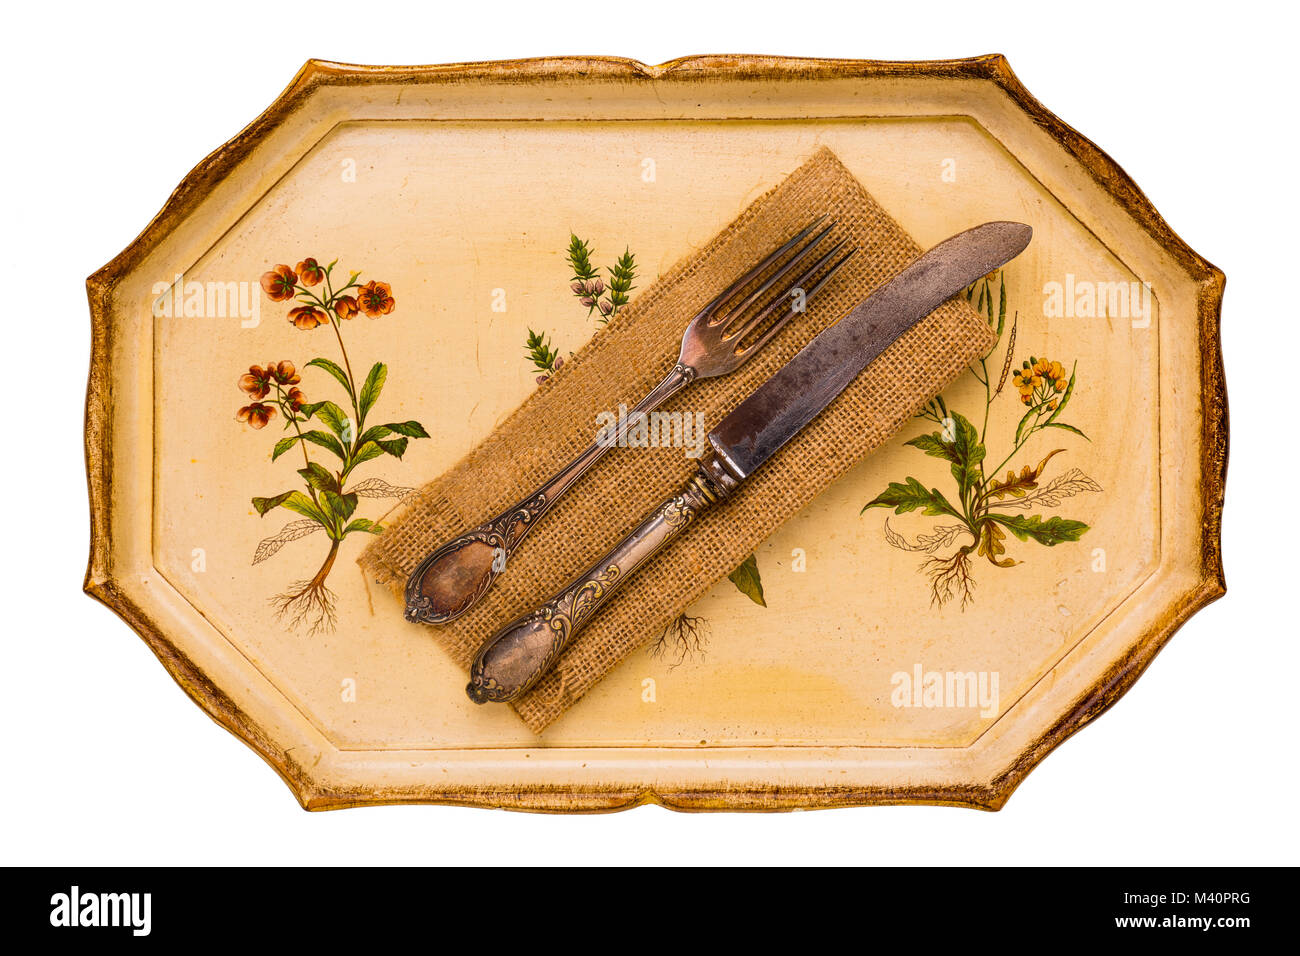 Antique tray with old cutlery spoon and knife isolated on white background, view from above, flatlay. Stock Photo